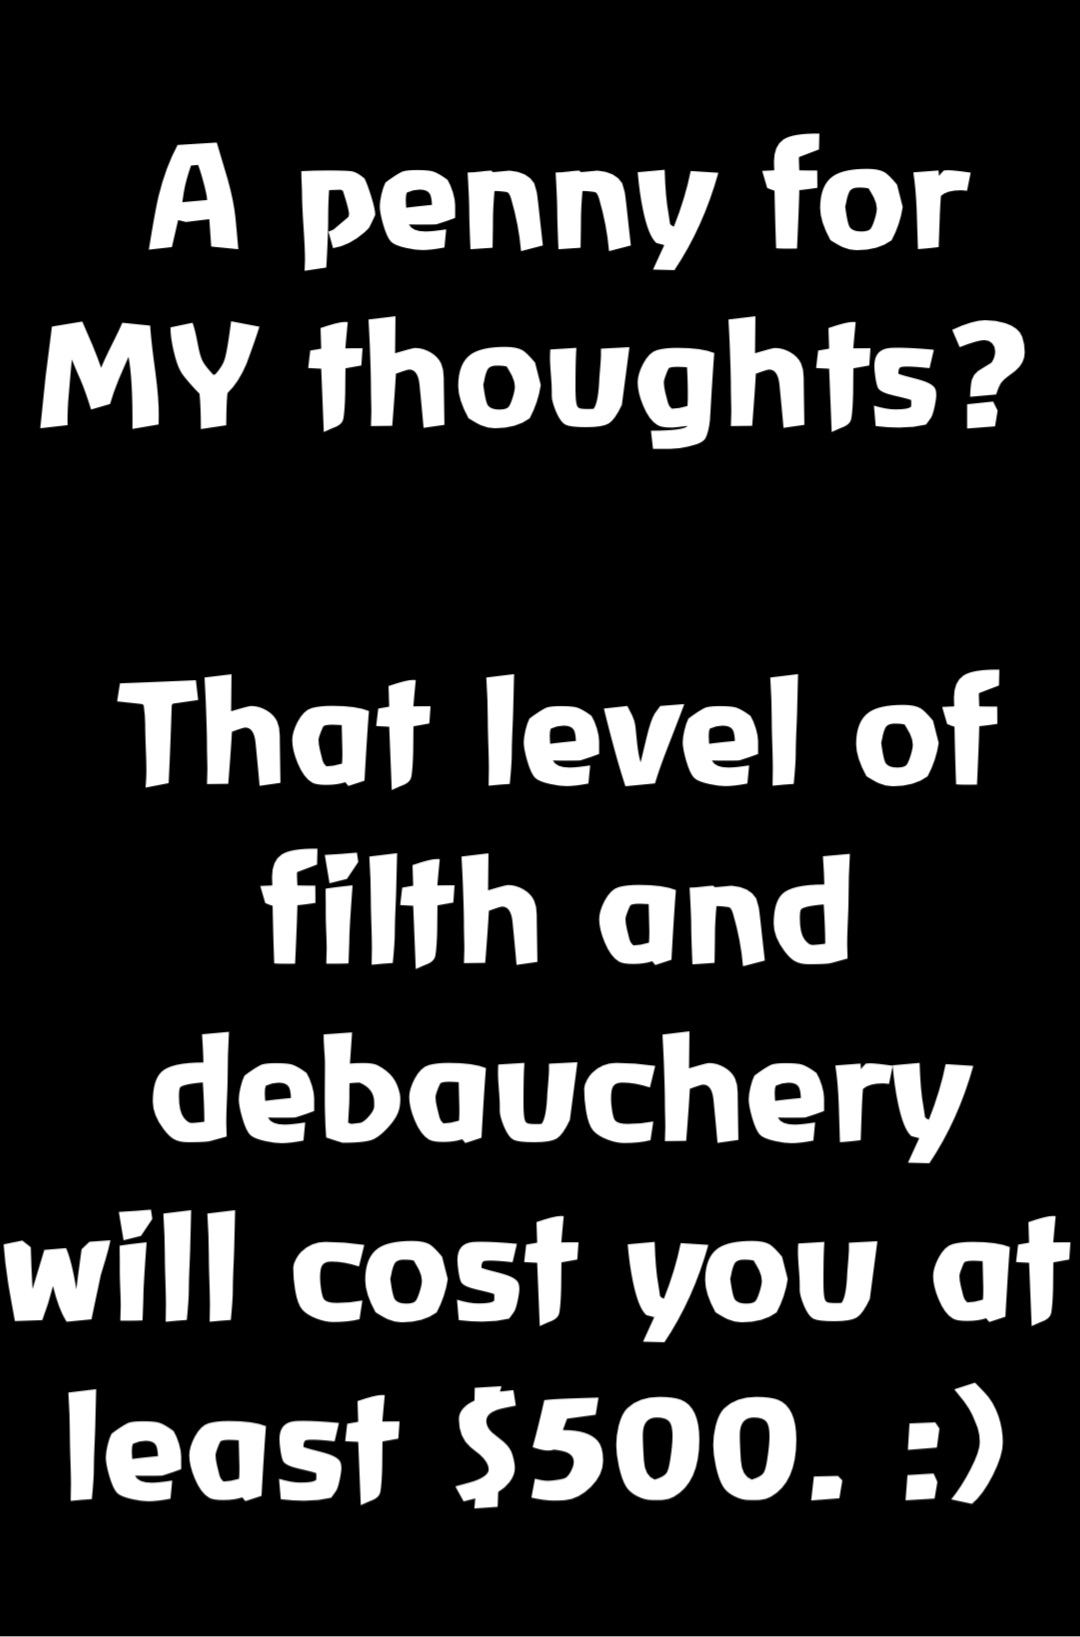 A penny for MY thoughts?

That level of filth and debauchery will cost you at least $500. :)